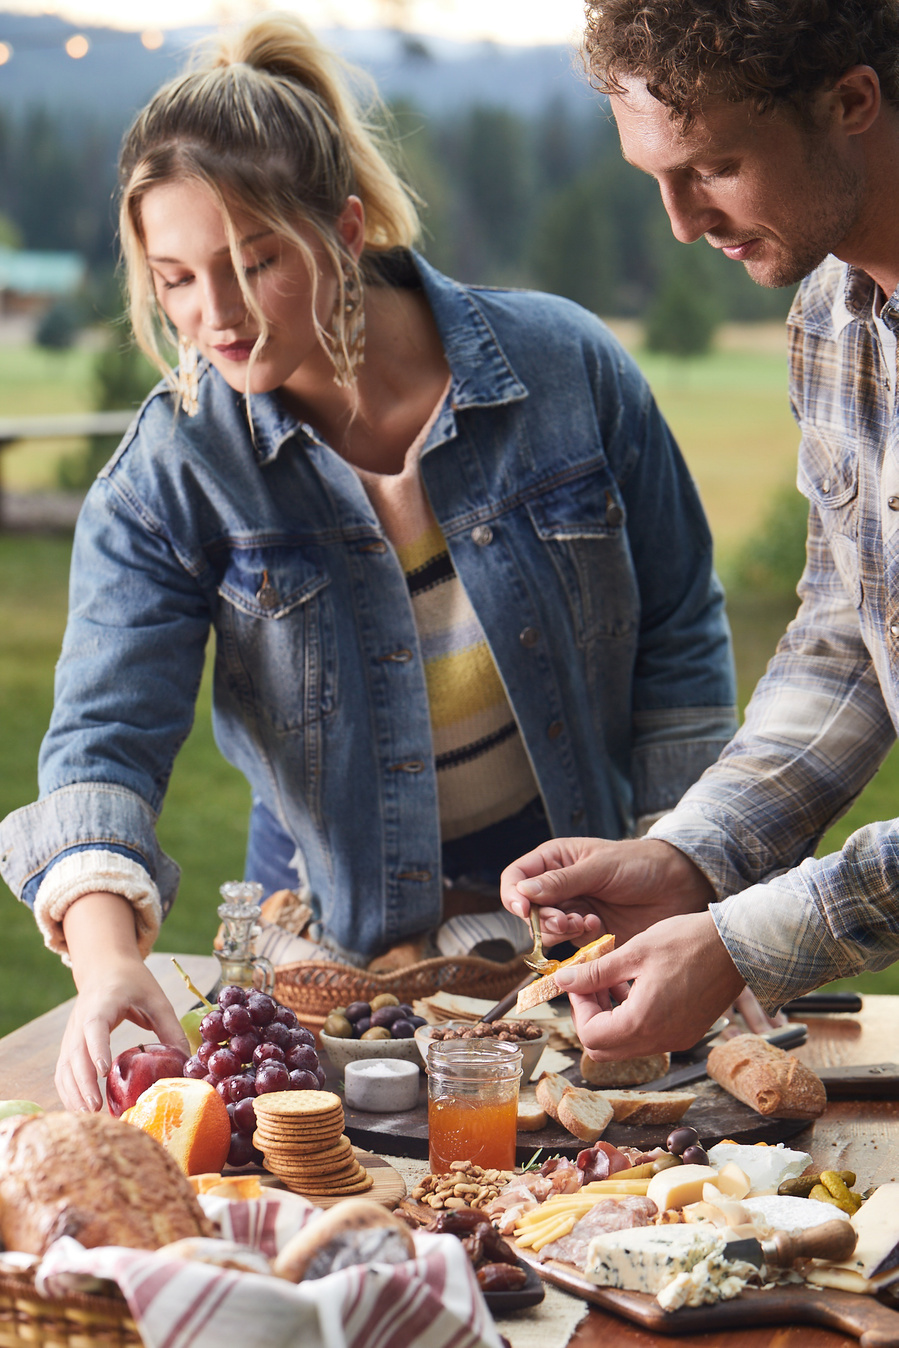 Two fashion models reach for food over a outdoor picnic table dinner party setup. Photography of food for lifestyle food photography for The Buckle